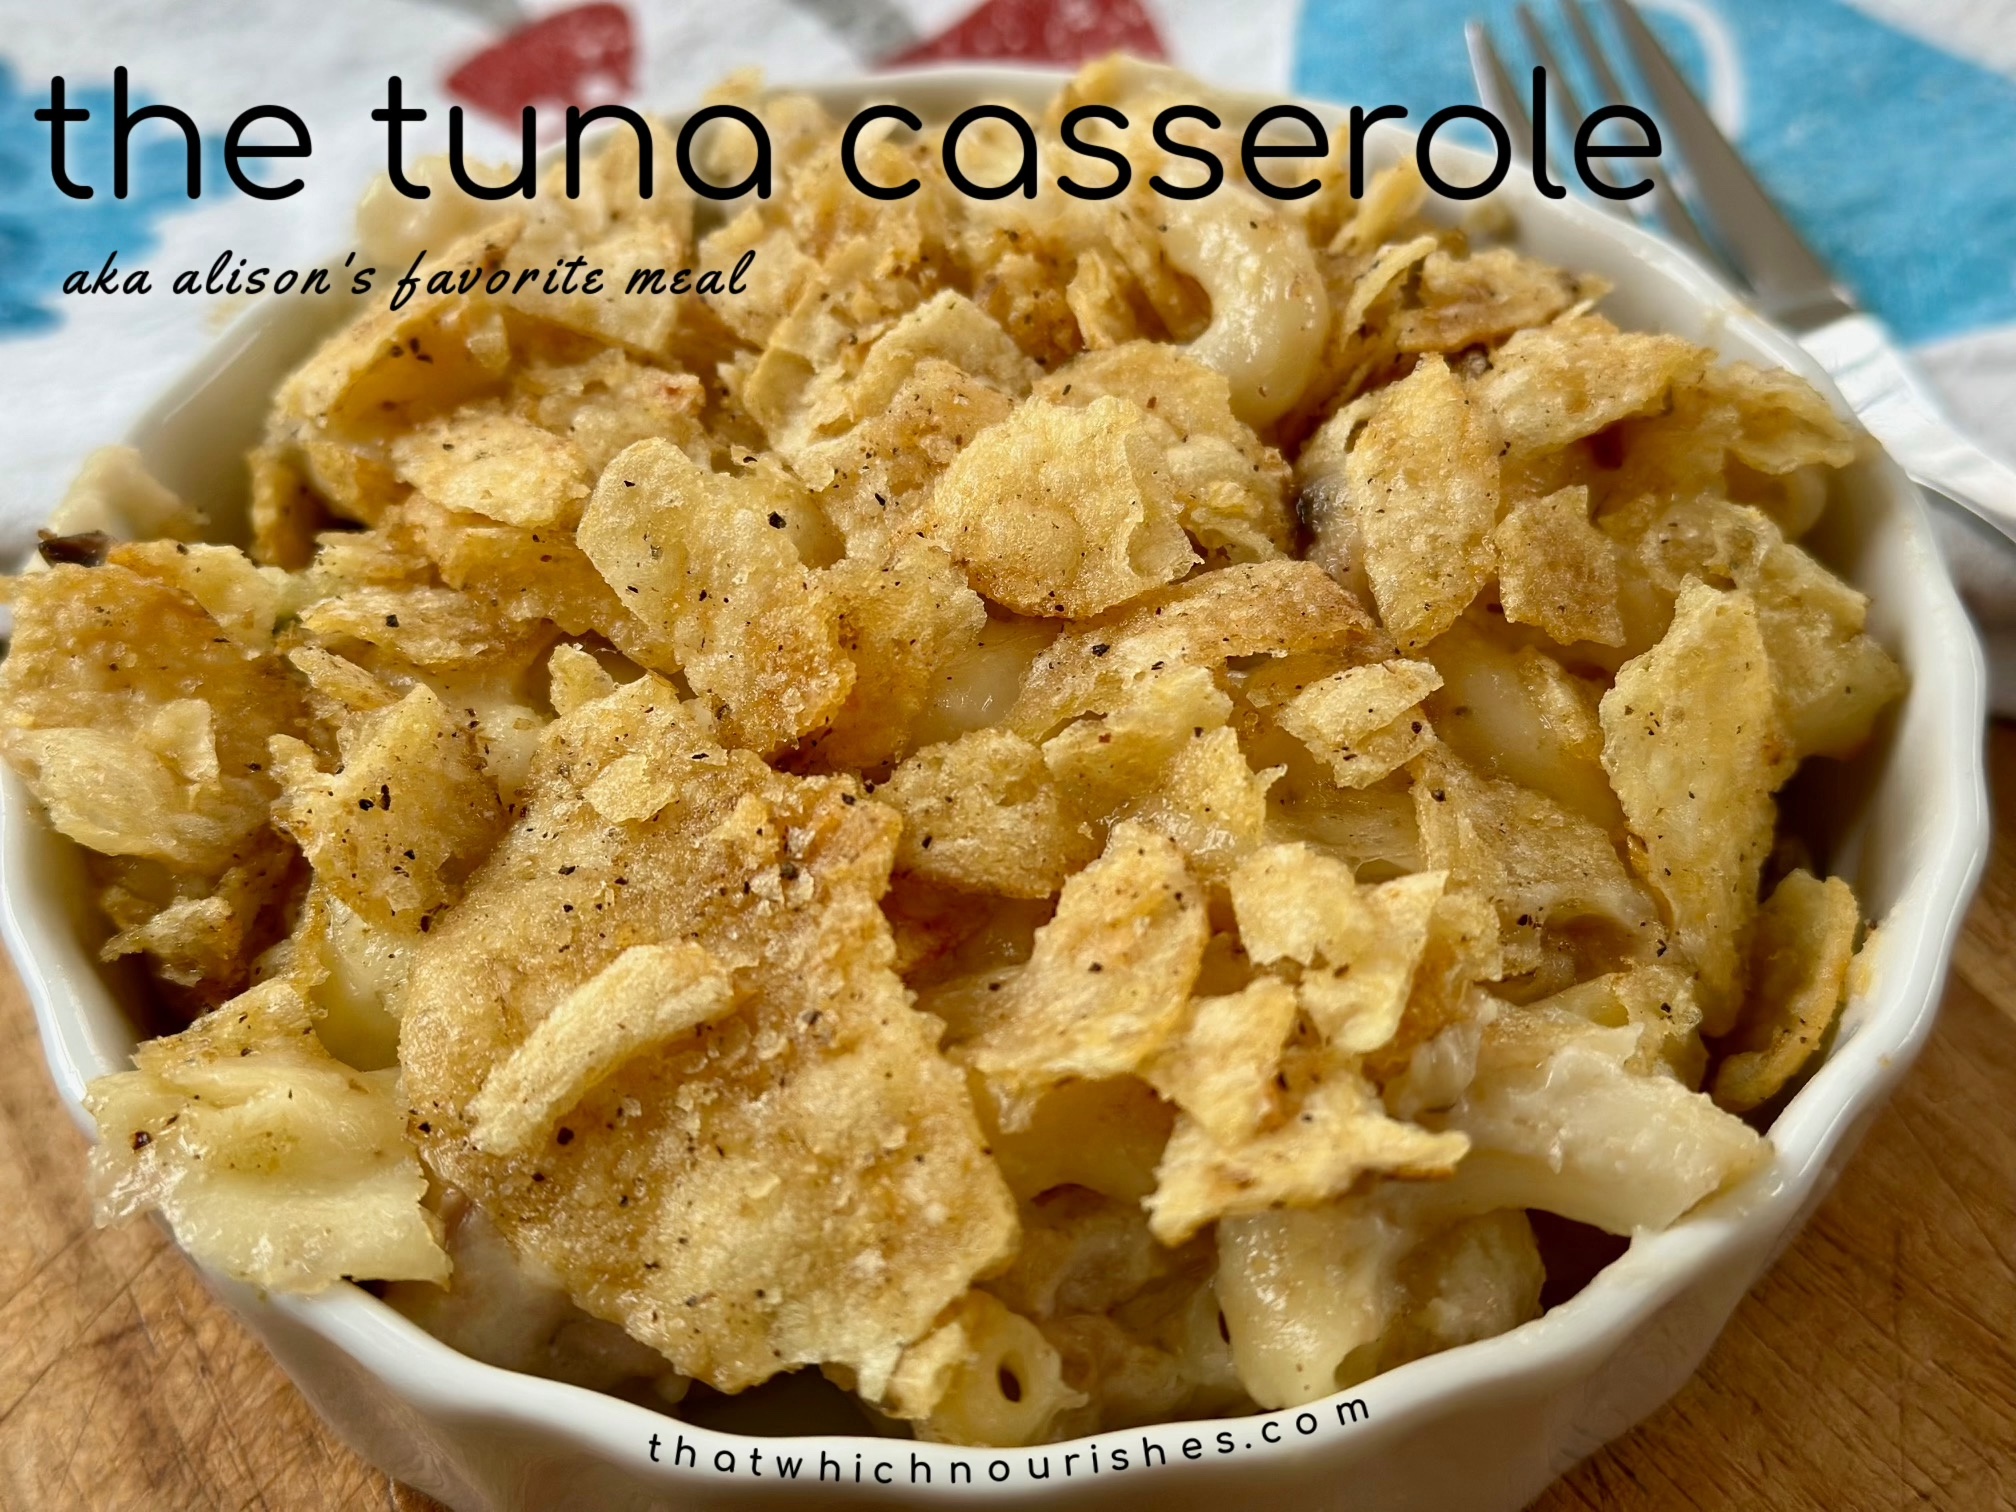 THE Tuna Casserole -- Absolutely the best version of casserole you're gonna eat! Cheesy perfection and my favorite meal. | thatwhichnourishes.com